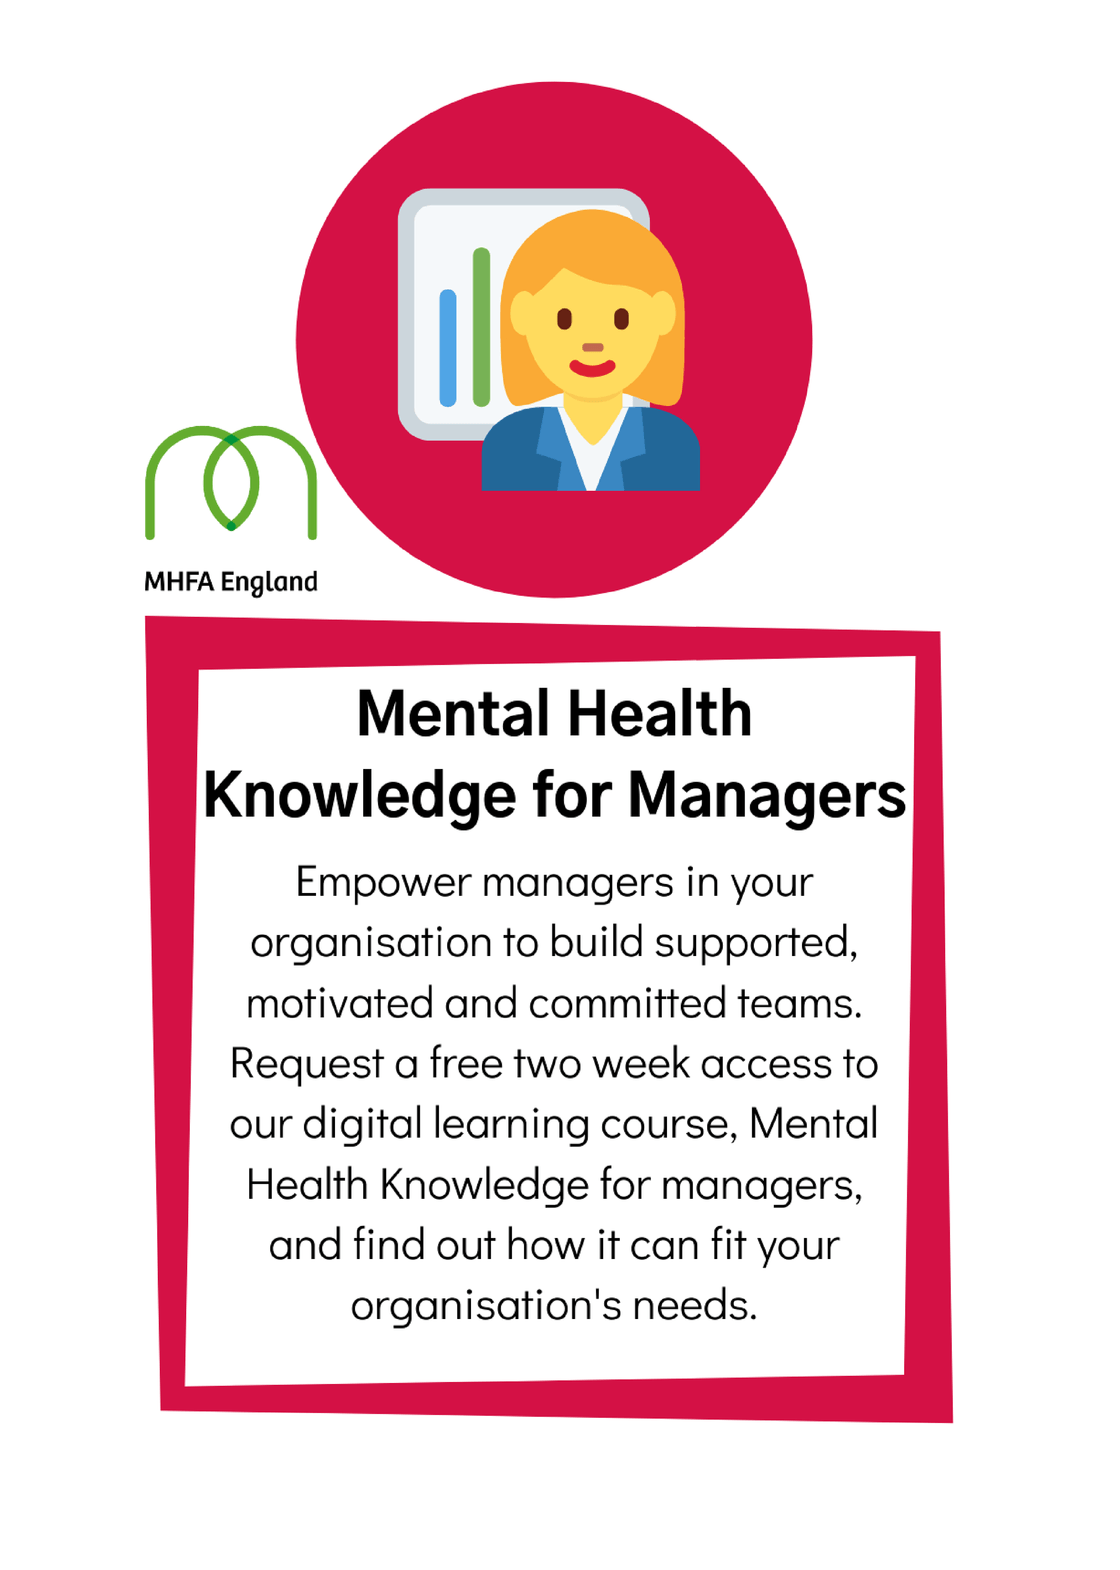 Mental Health Knowledge for Managers